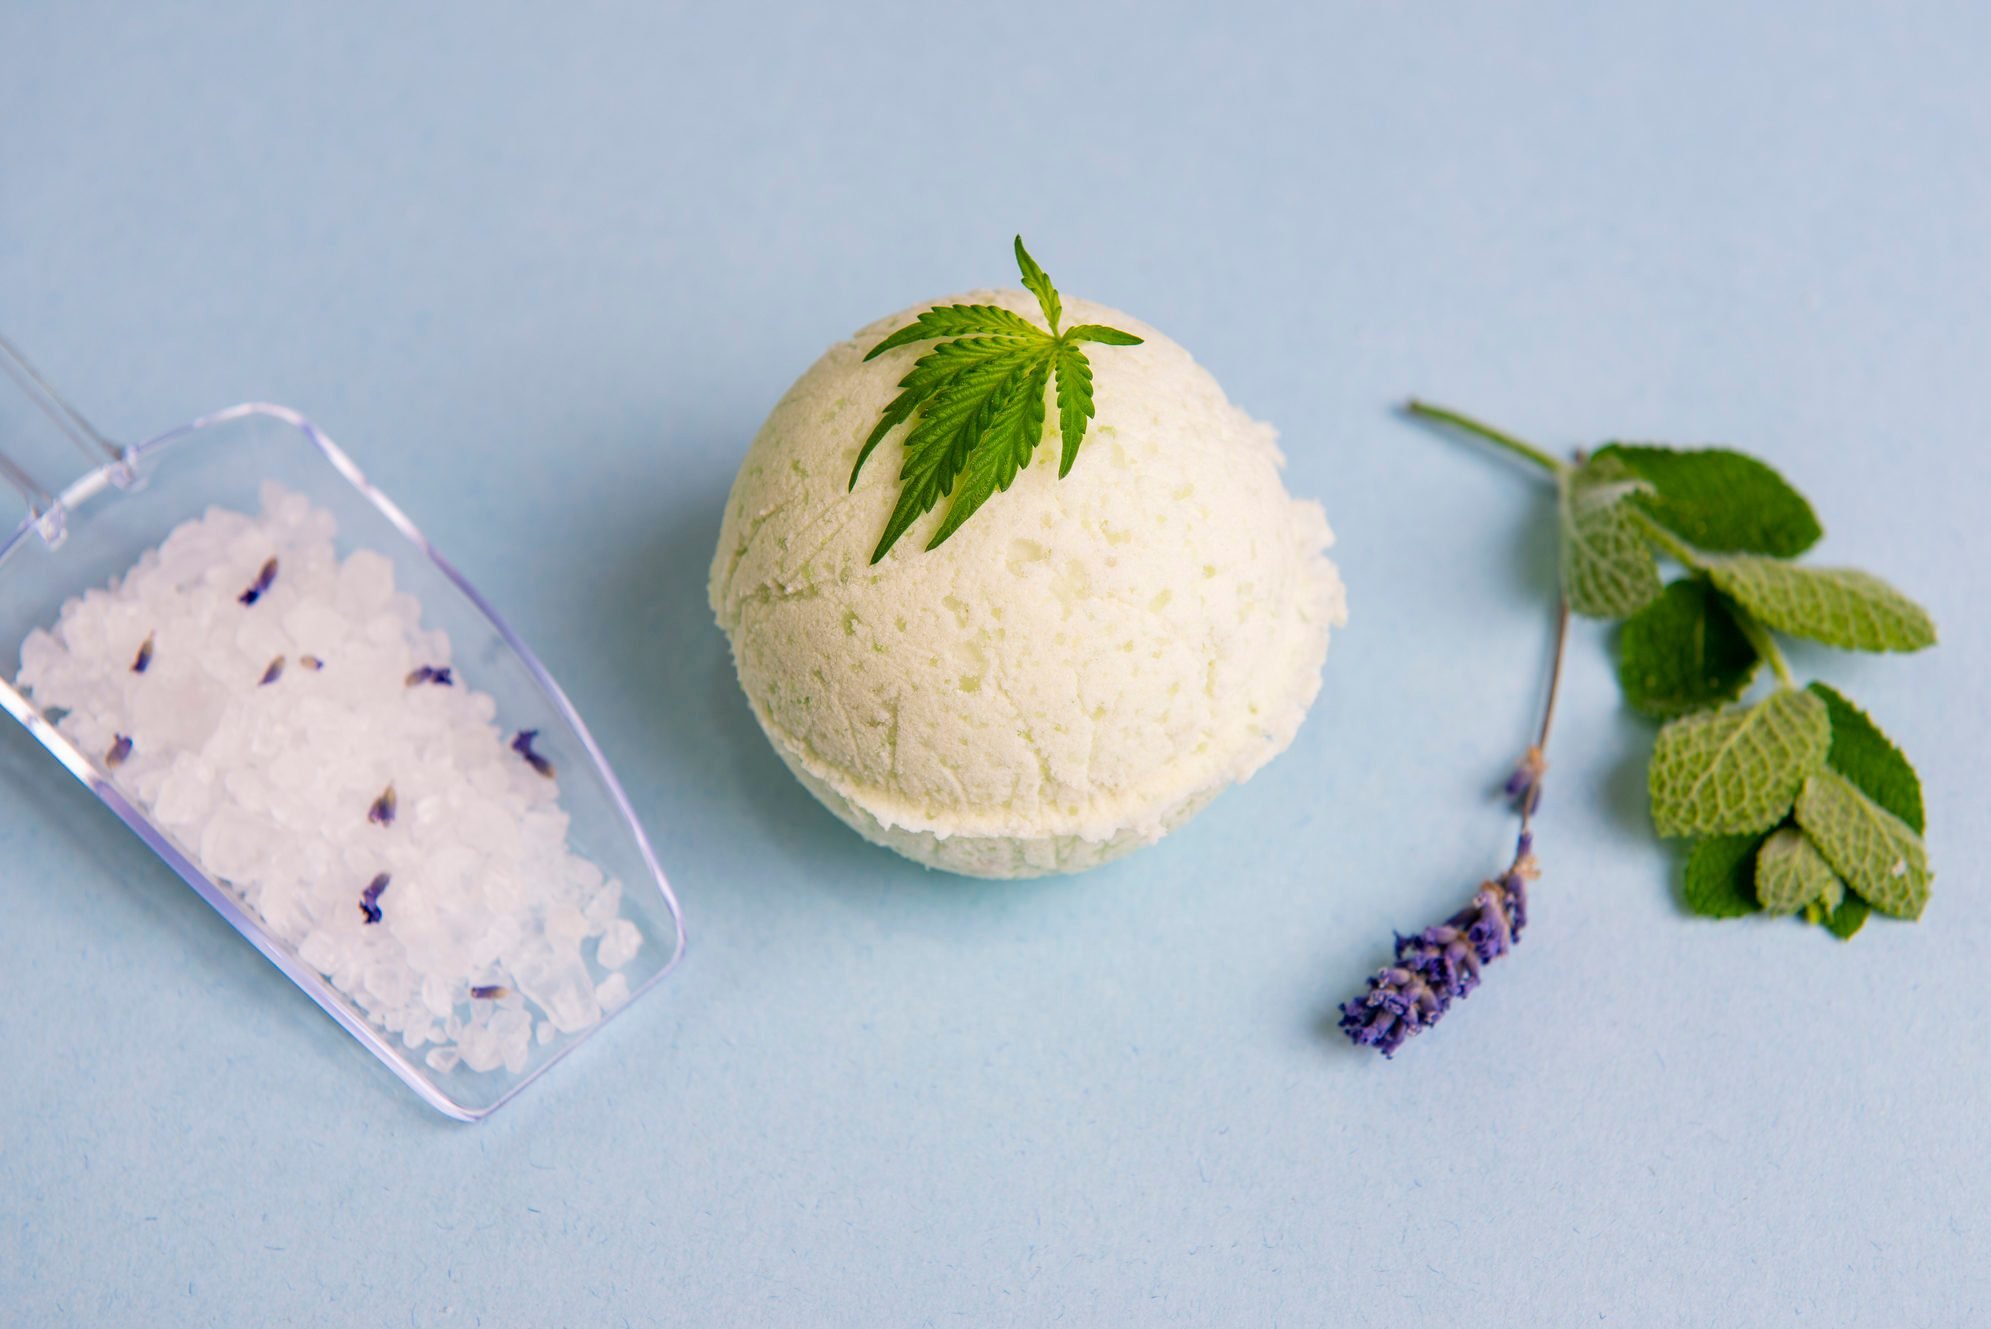 Cannabis wellness products with bath bomb and soaking salts